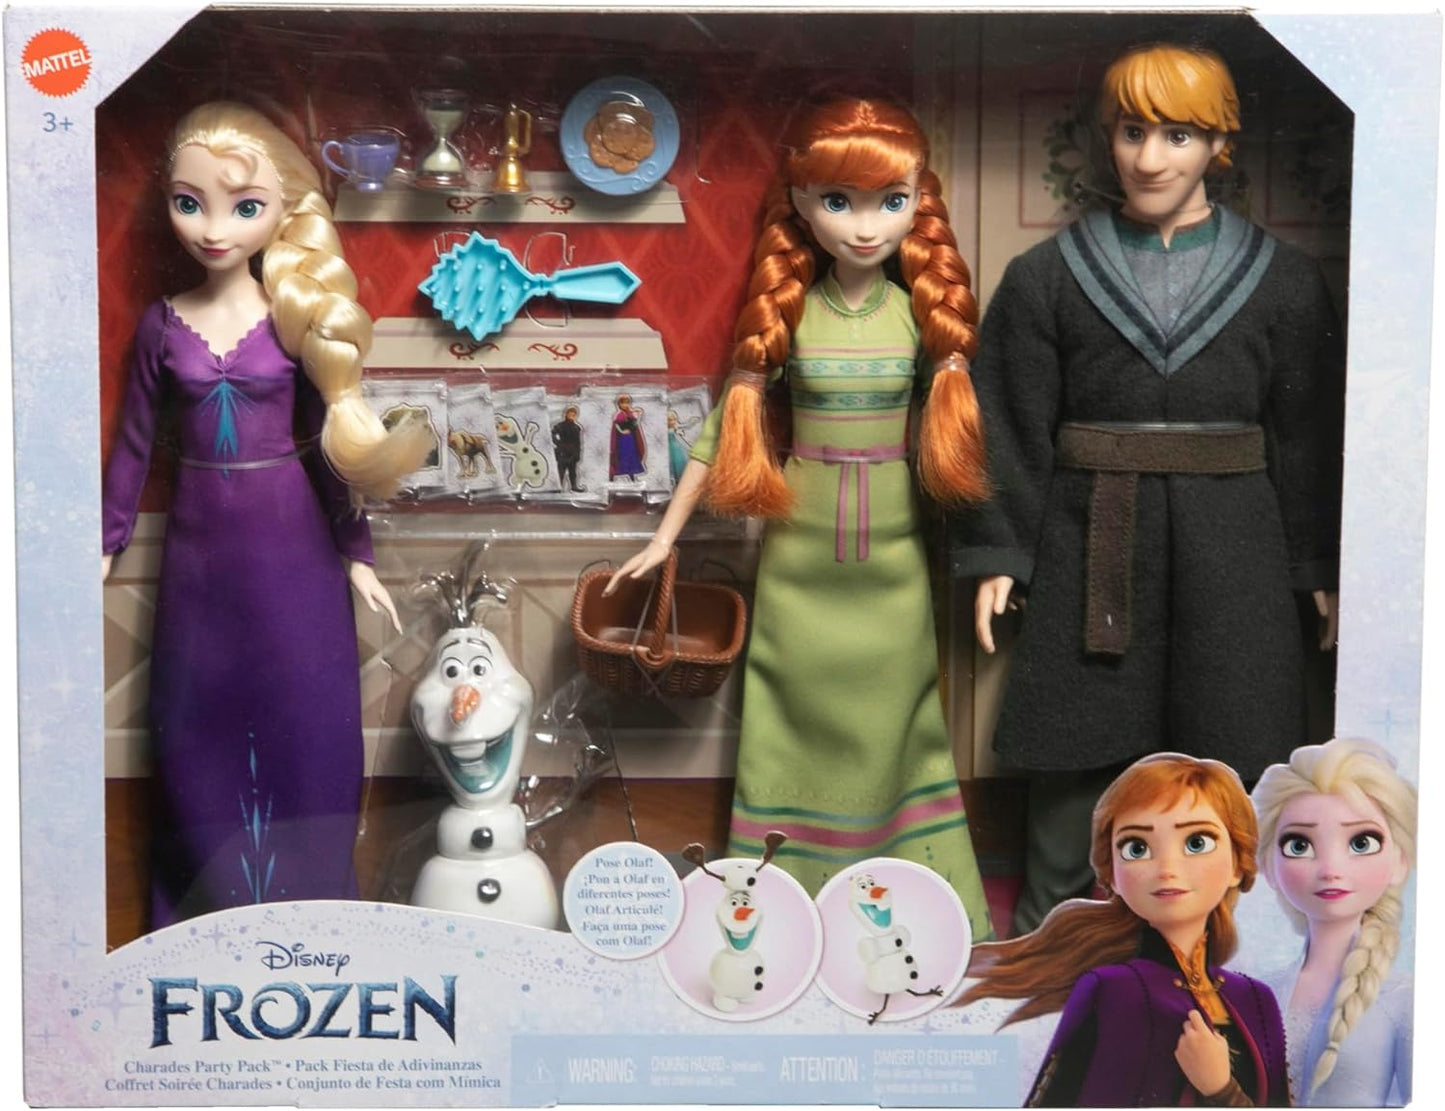 Disney Frozen - Party Set with Movable Anna, Elsa and Kristoff Dolls, Snowman Olaf, Accessories